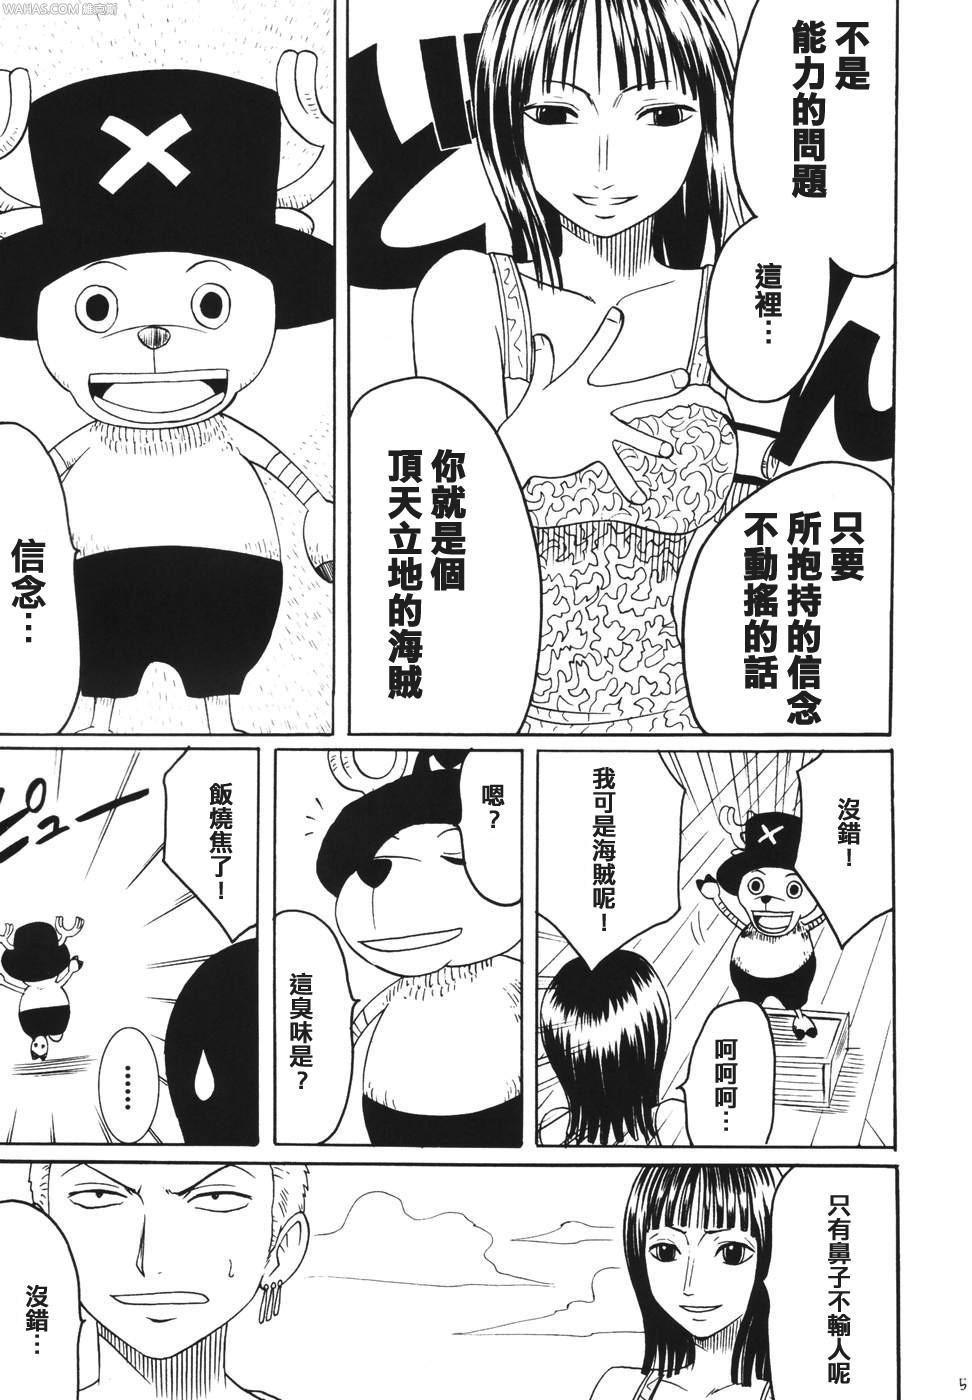 Gape Dancing Animation Run - One piece Glamcore - Page 4